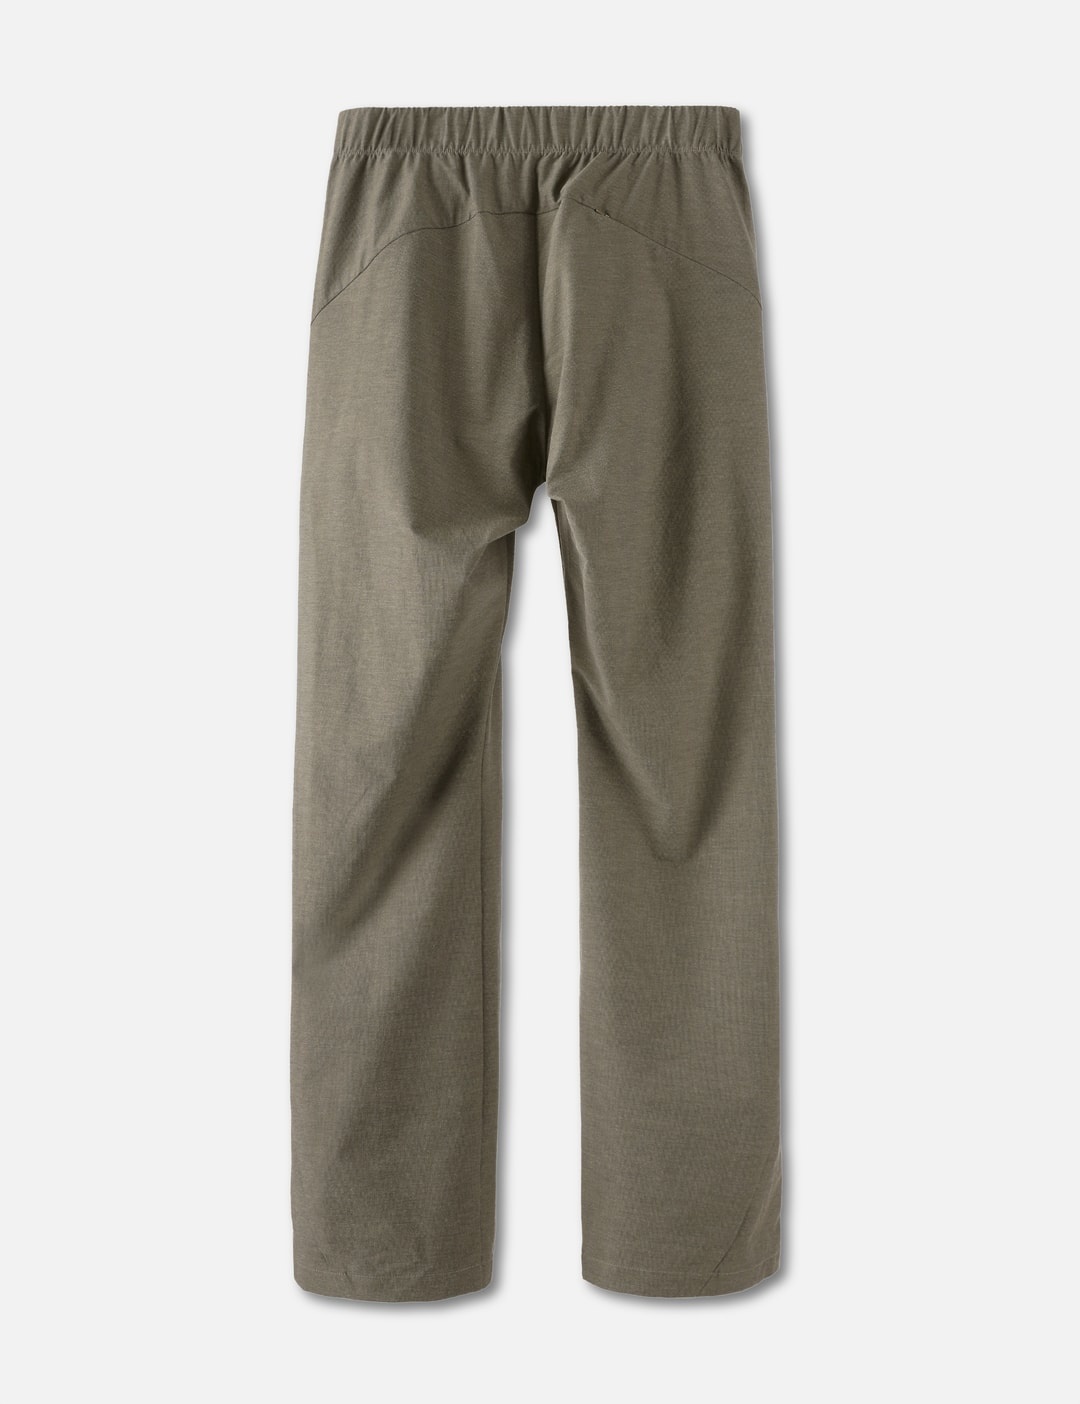 5.1 TECHNICAL PANTS RIGHT - 2